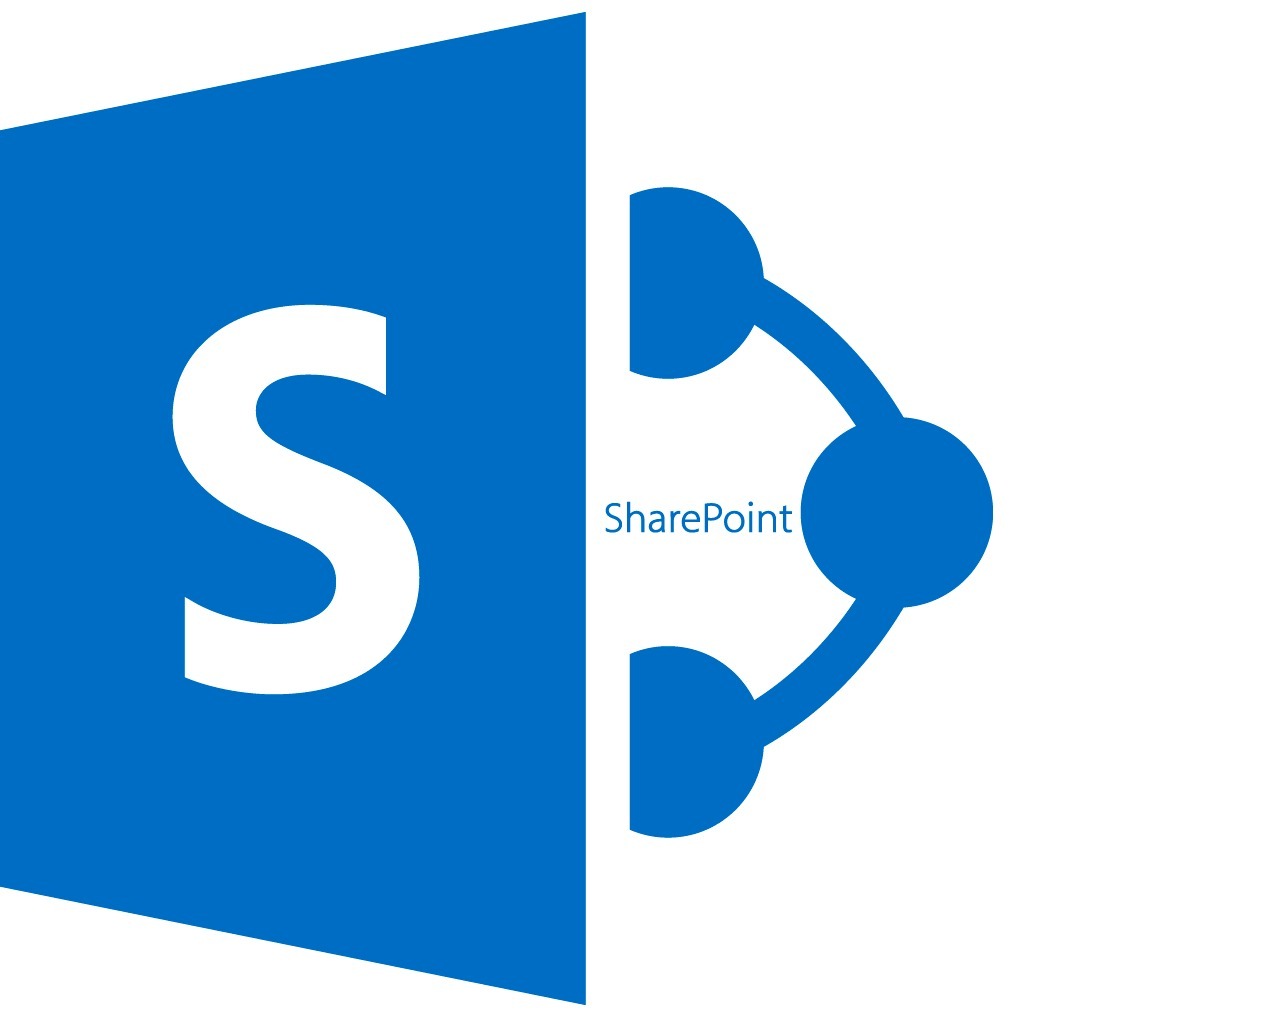 Benefits of SharePoint